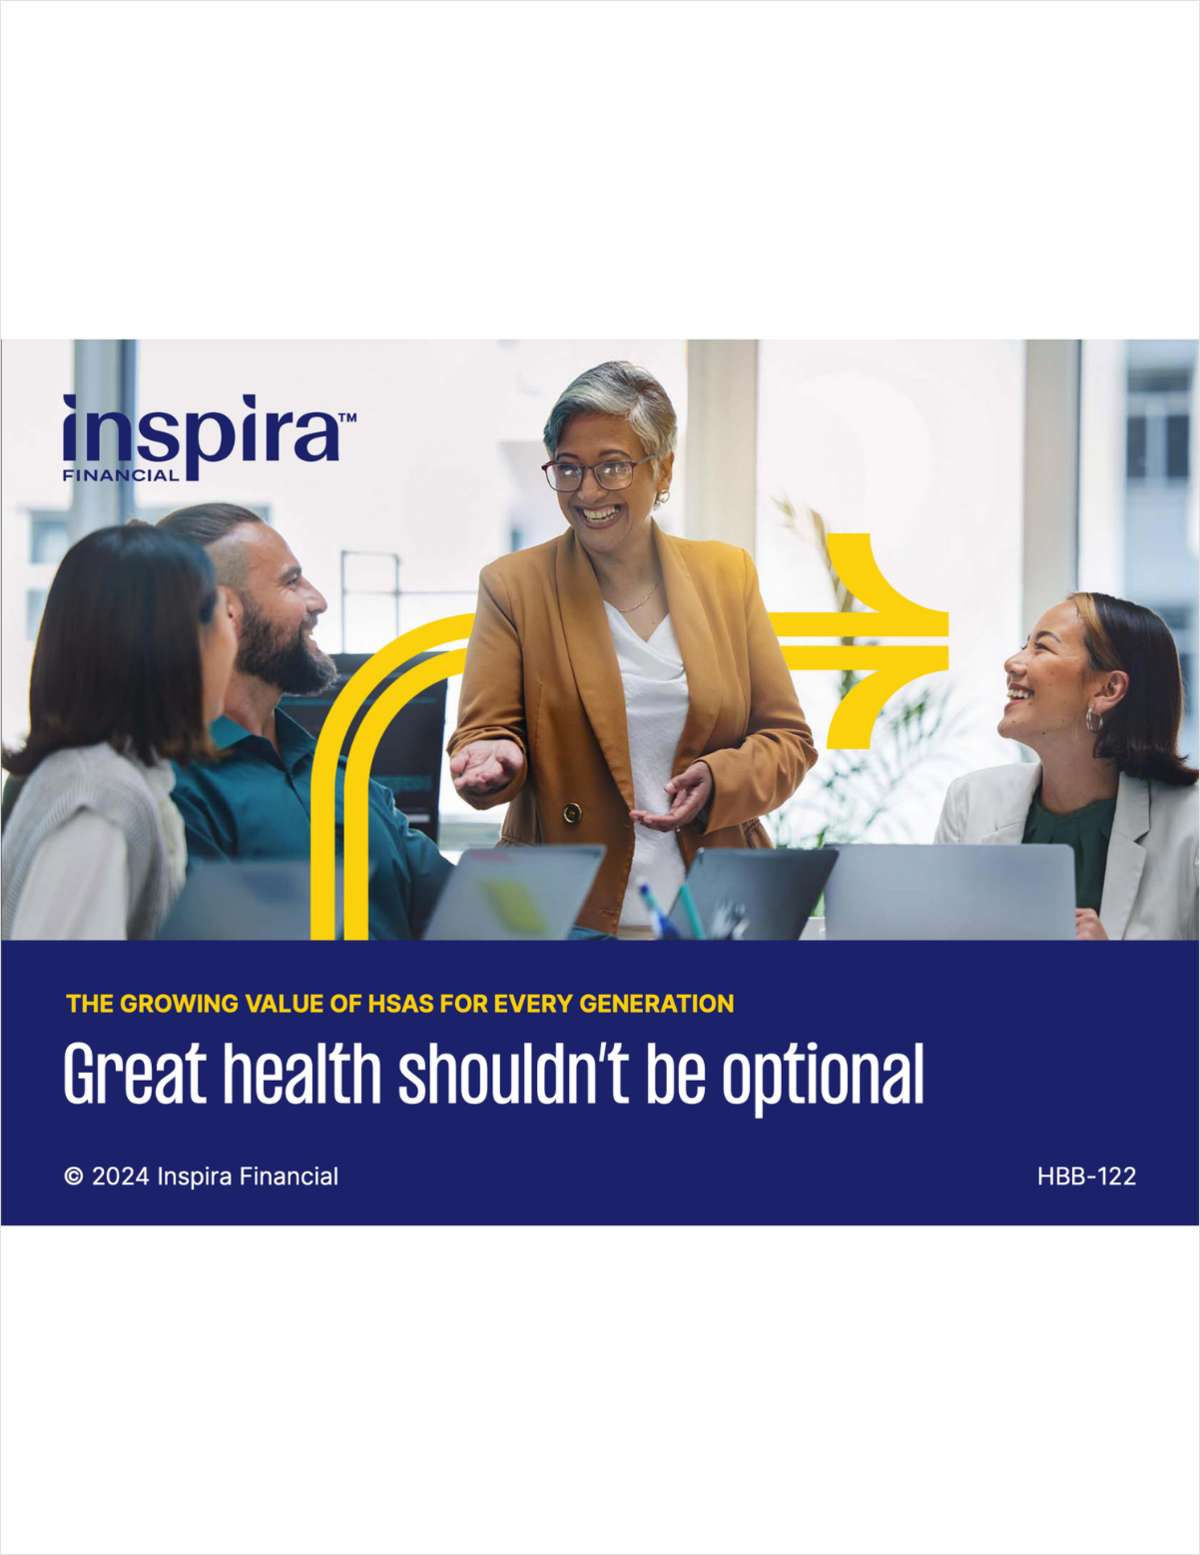 The Growing Value of HSA's for Every Generation: Great health shouldn't be optional